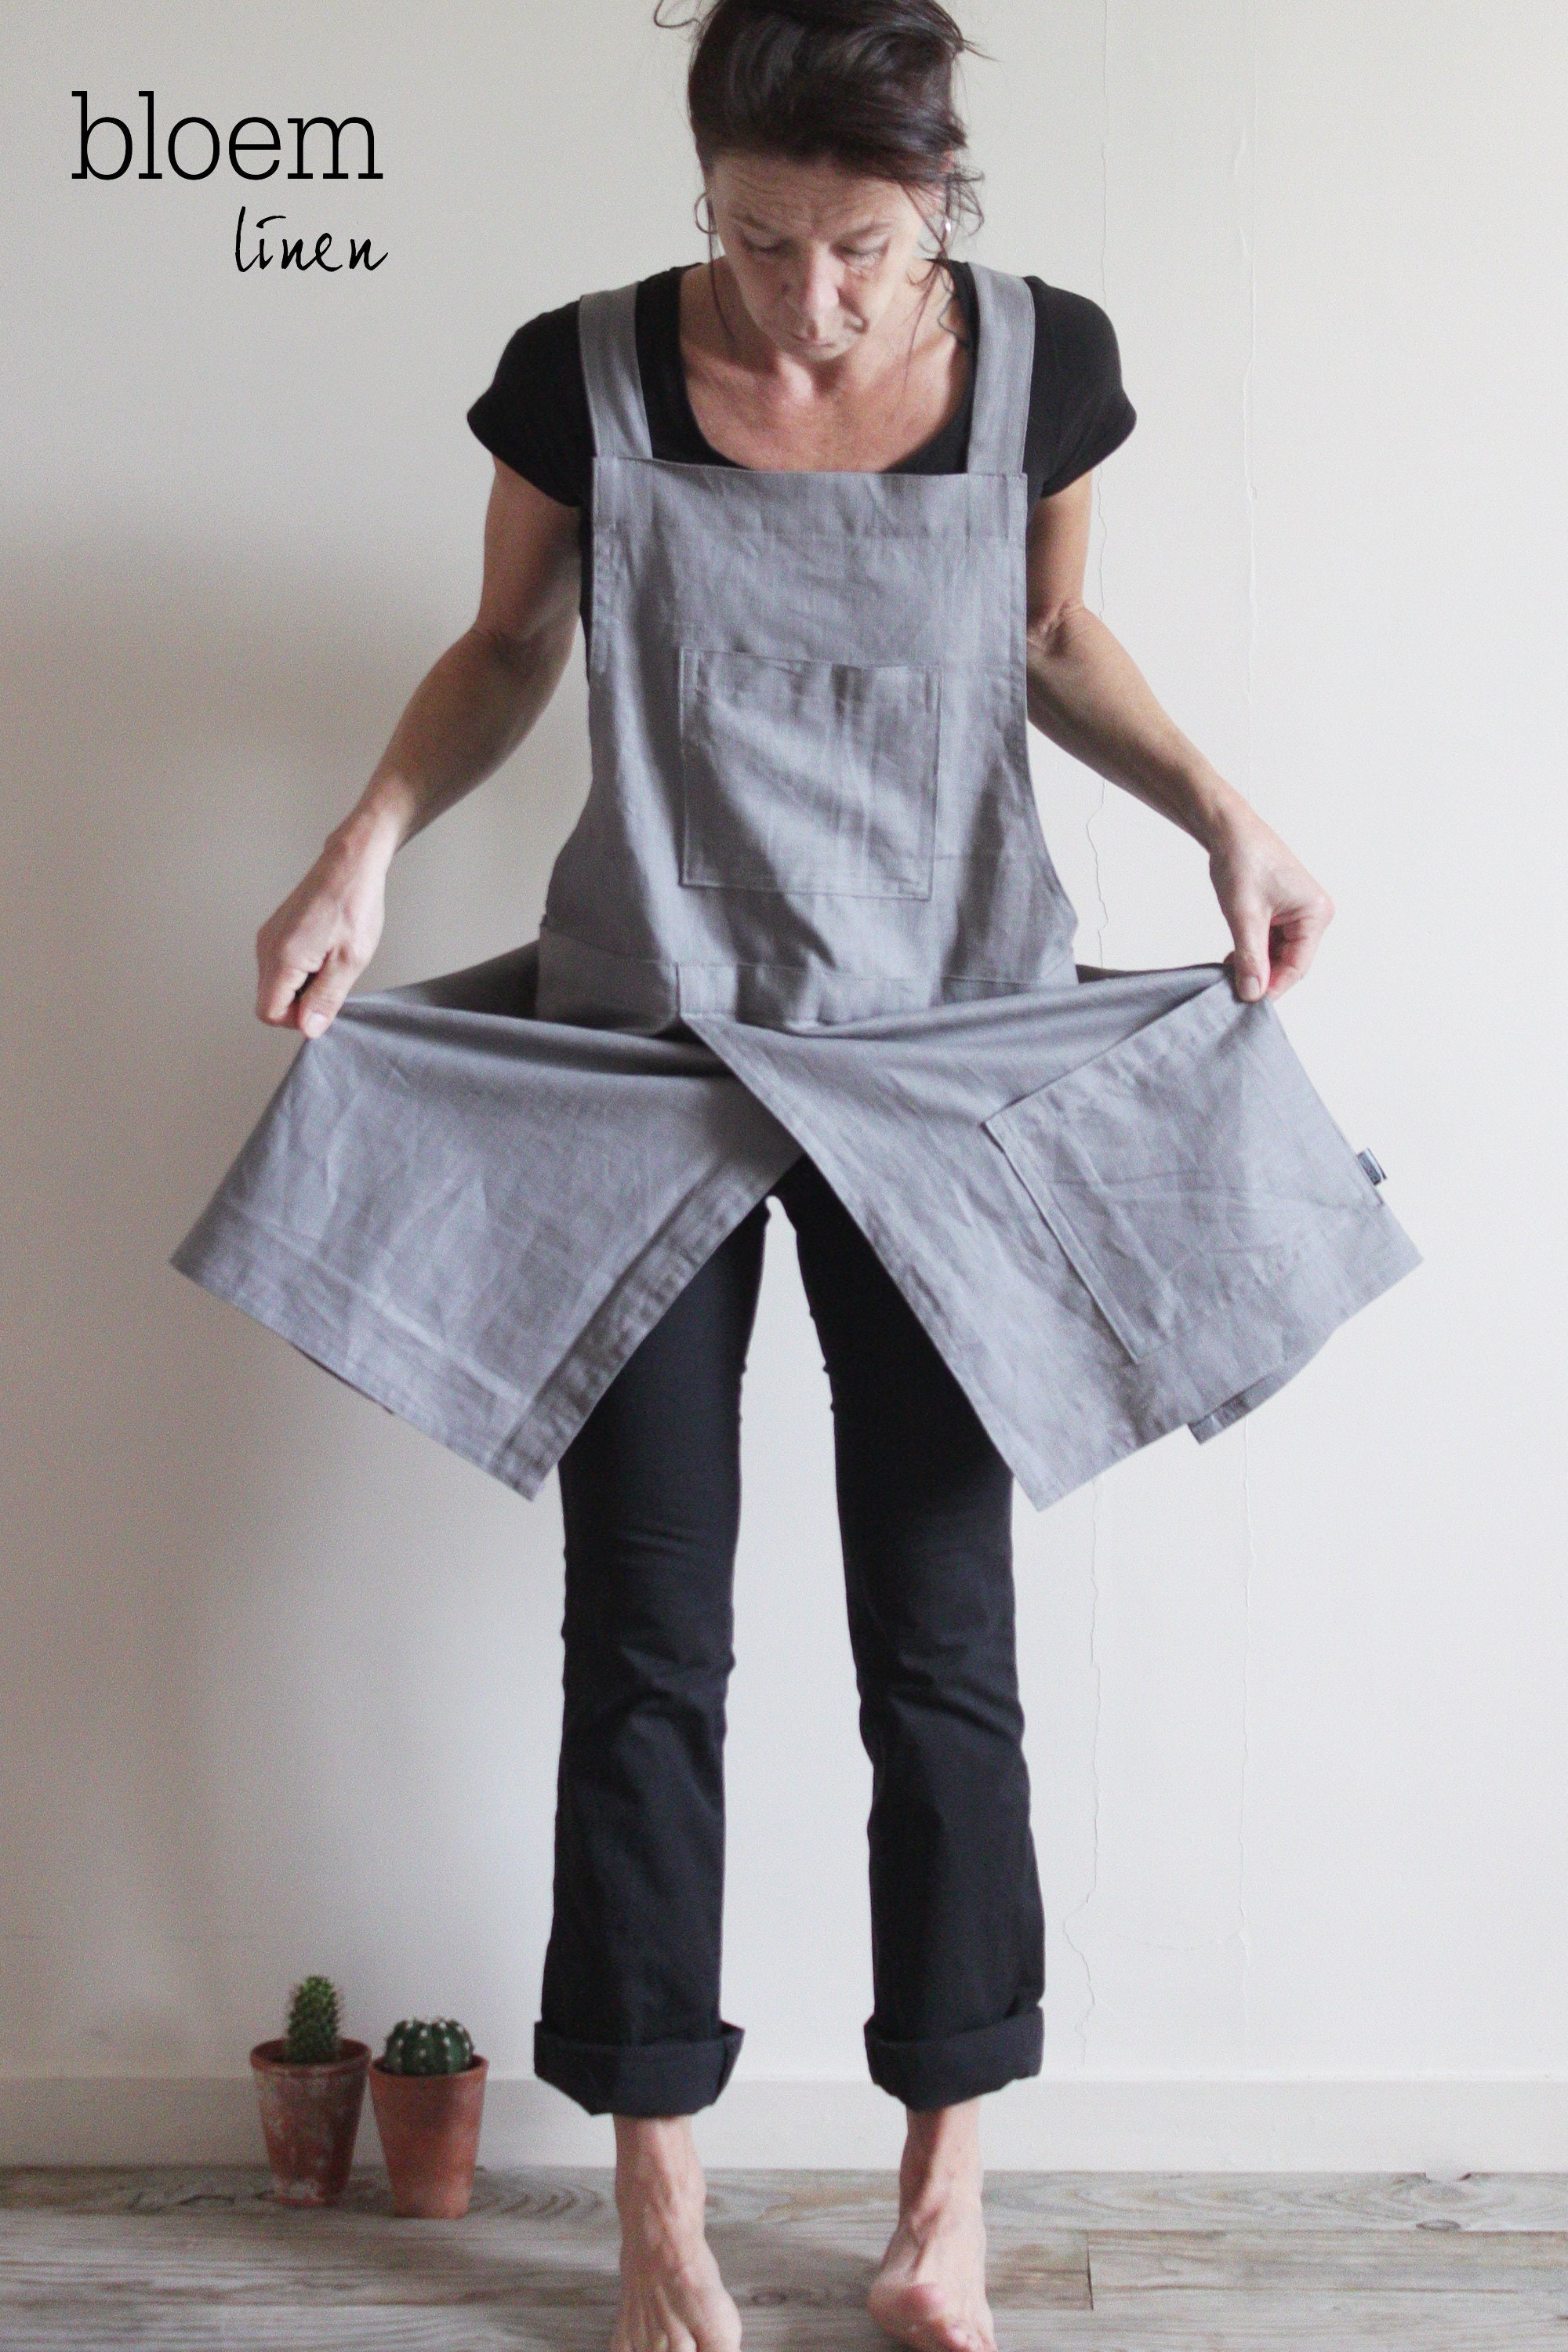 Pottery Apron. Pleated Canvas Pinafore With Split Leg Skirt and Pockets.  Christmas Gift for Potters, Artists & Makers. Ochre No14:2 